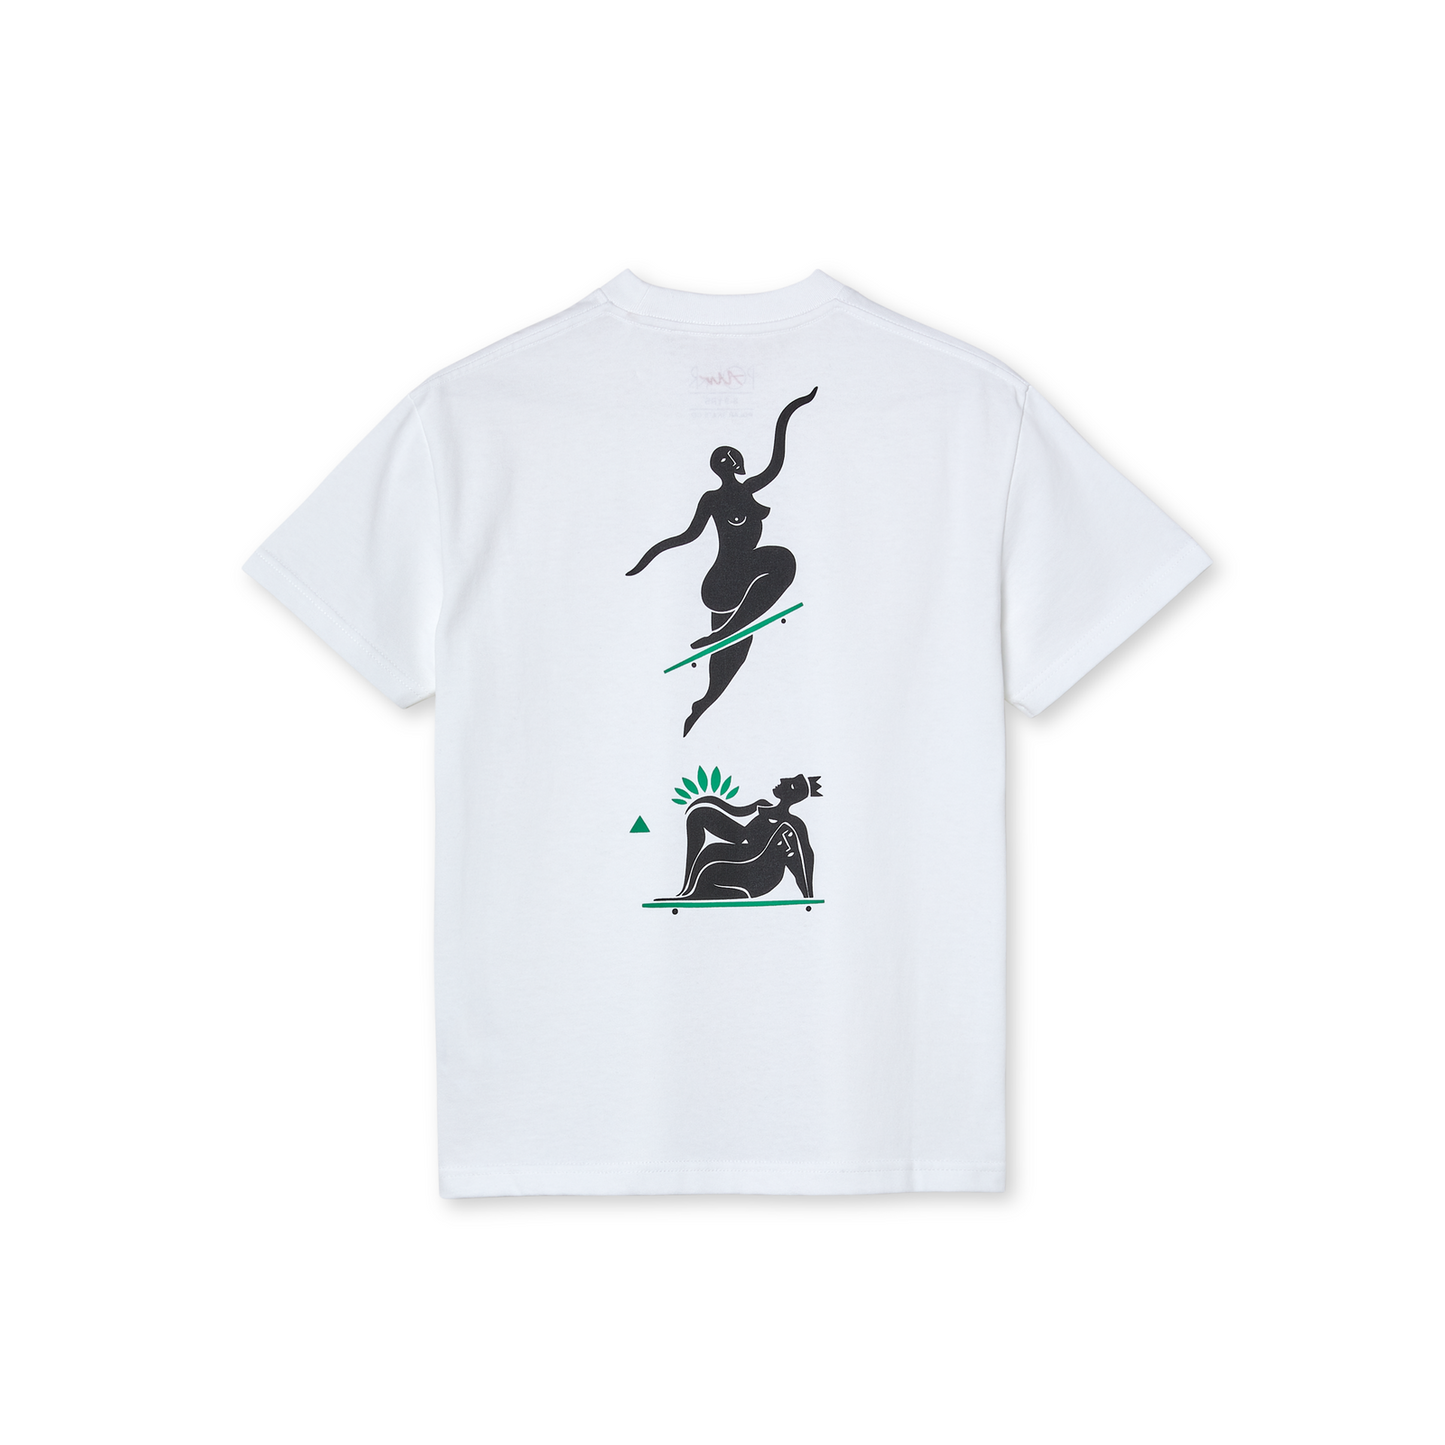 No Complies Forever Tee Jr. - White